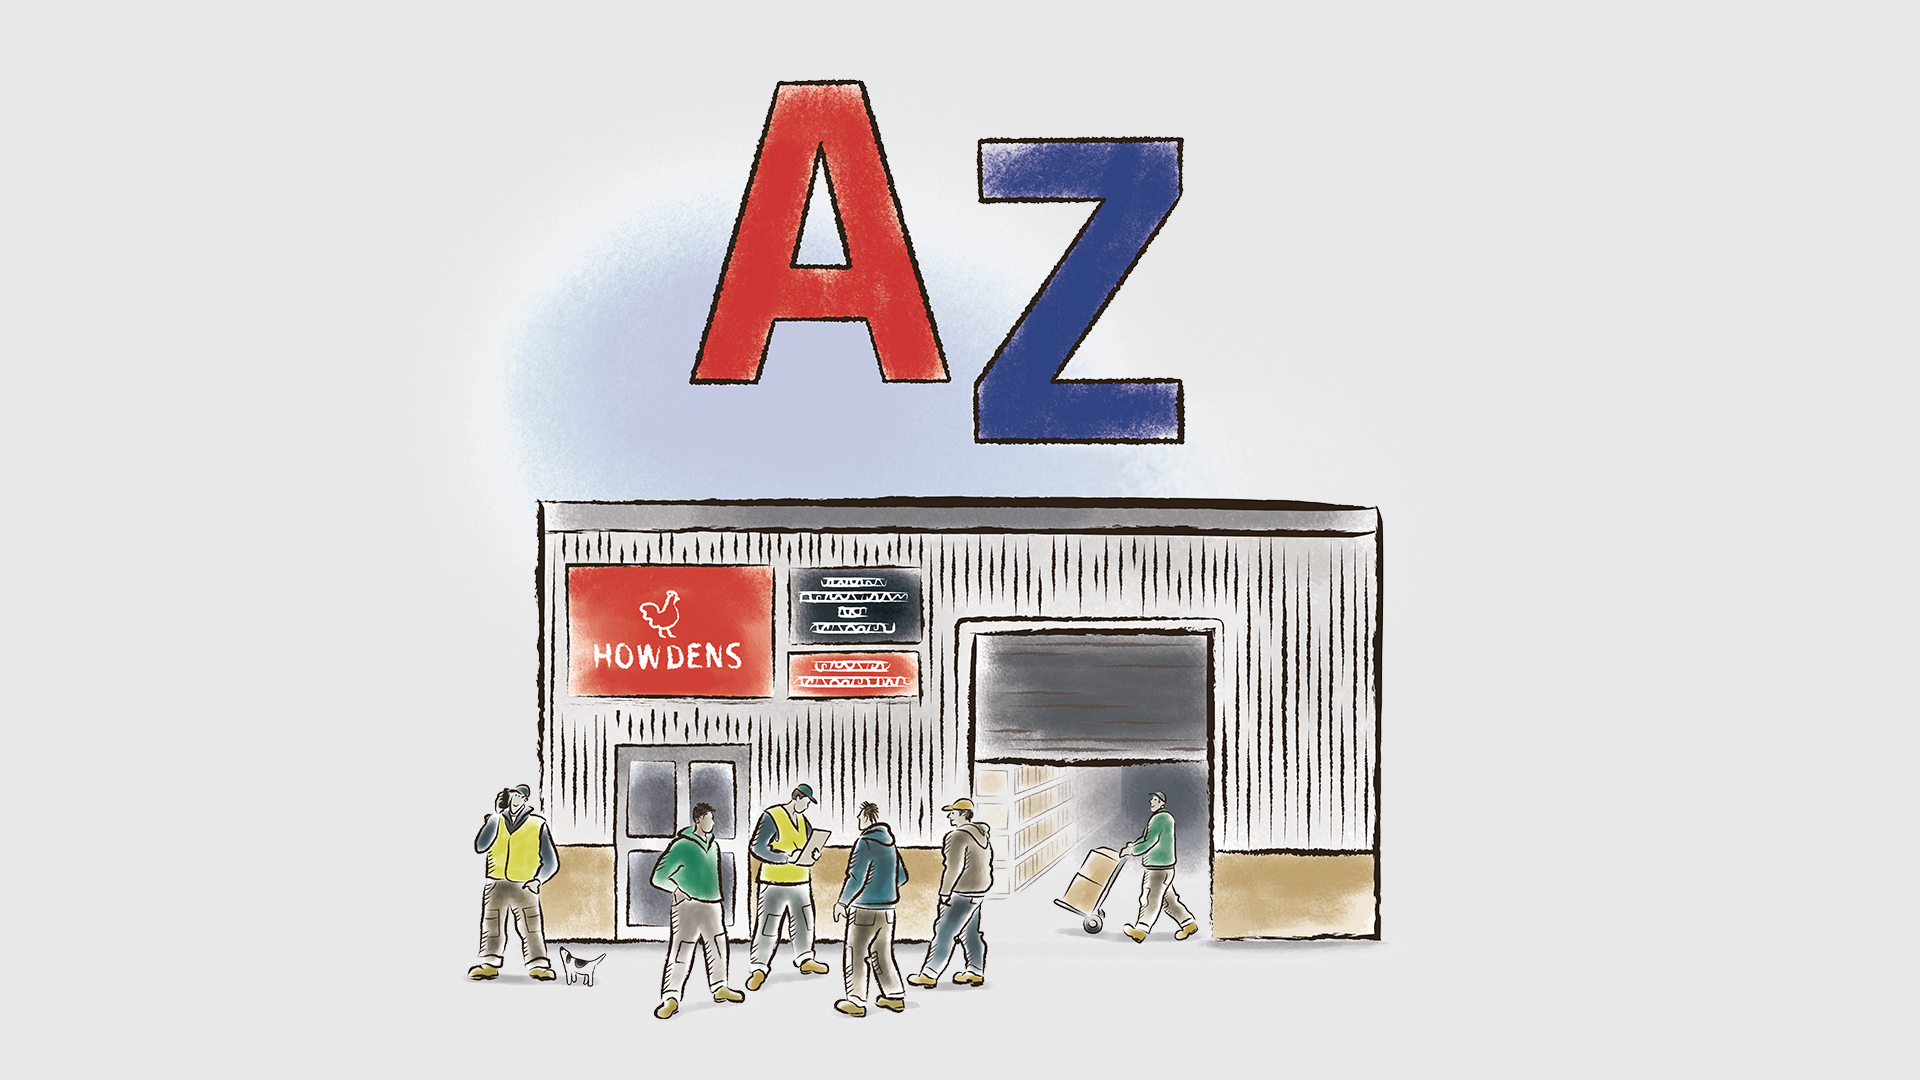 Illustration of a Howdens depot for A to Z lister